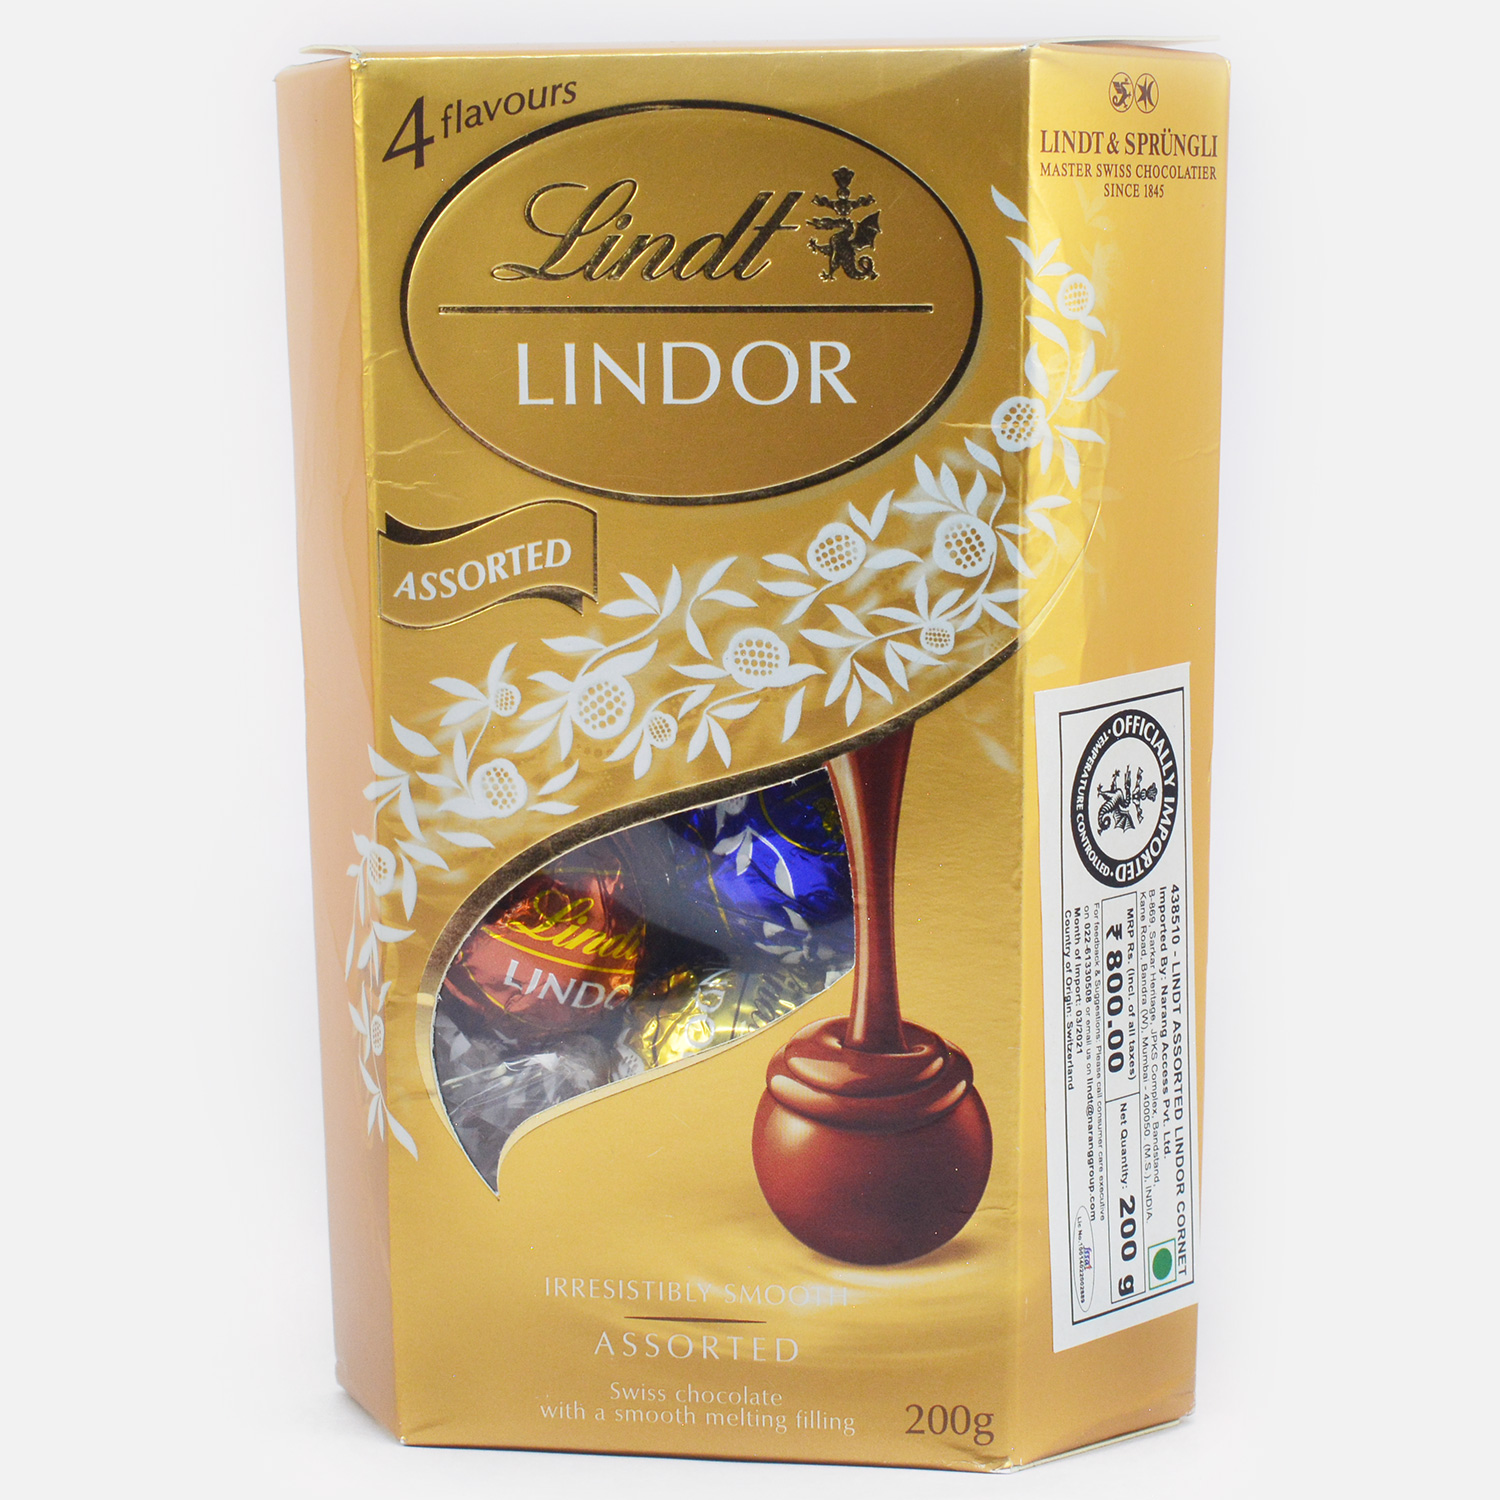 Lindt Lindor 200g 4 Flavours Chocolate